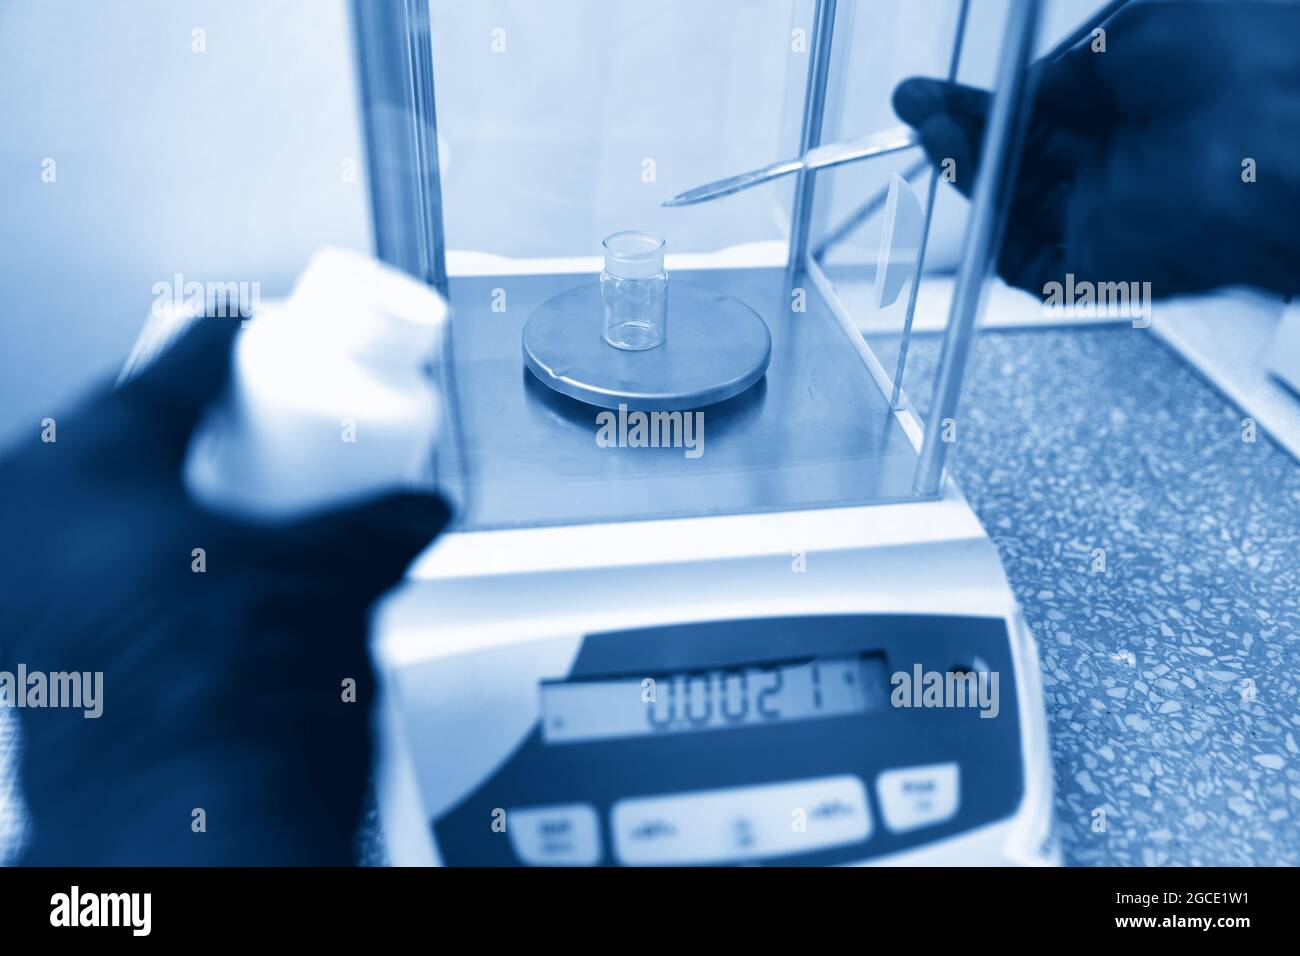 Scientist weighing chemicals by digital scales in grams in chemical laboratory. Blue toning Stock Photo